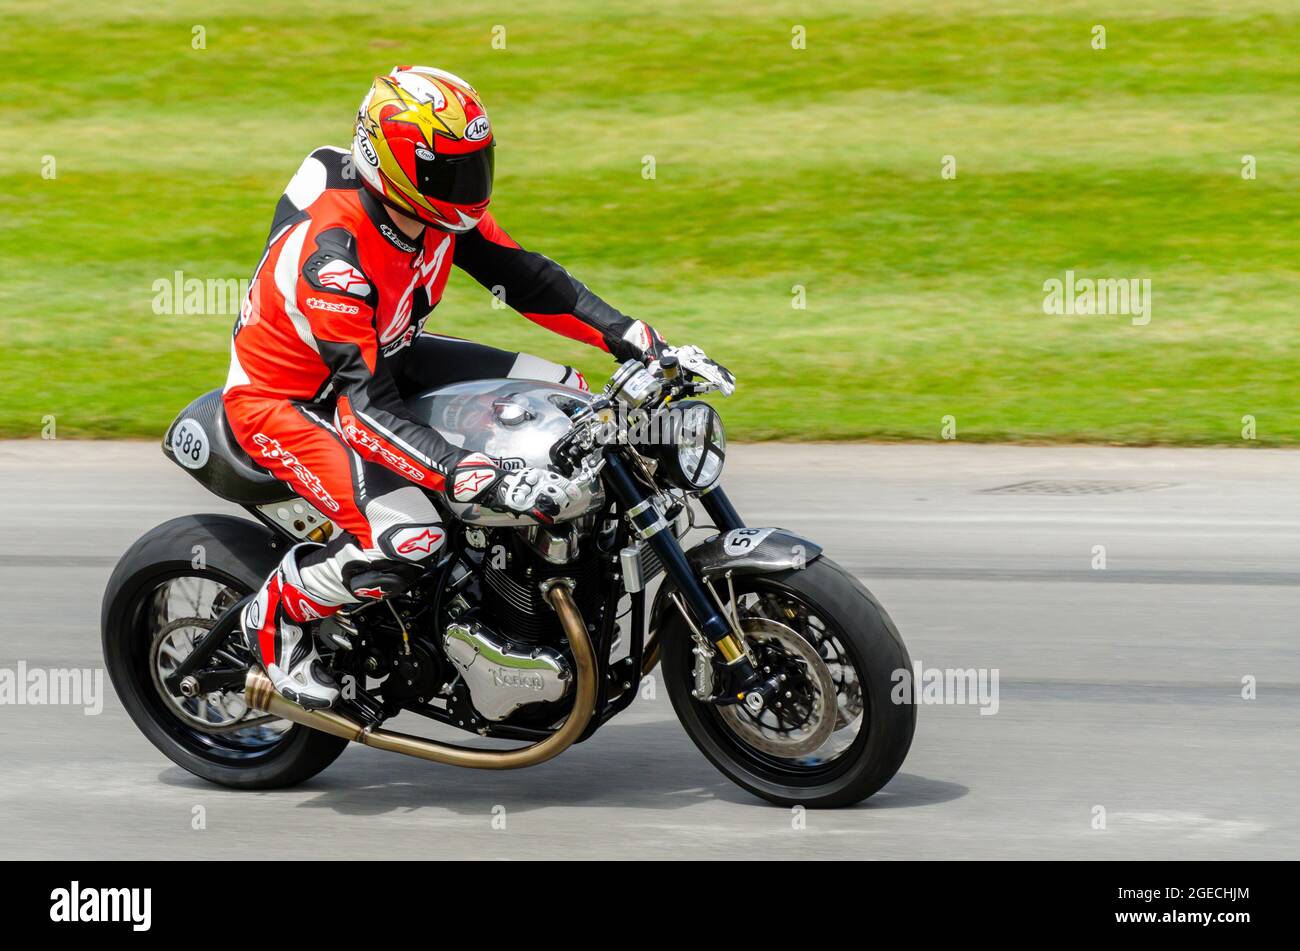 2014 Norton Domiracer motorcycle racing up the hill climb track at the Goodwood Festival of Speed motor racing event 2014. Limited edition bike Stock Photo